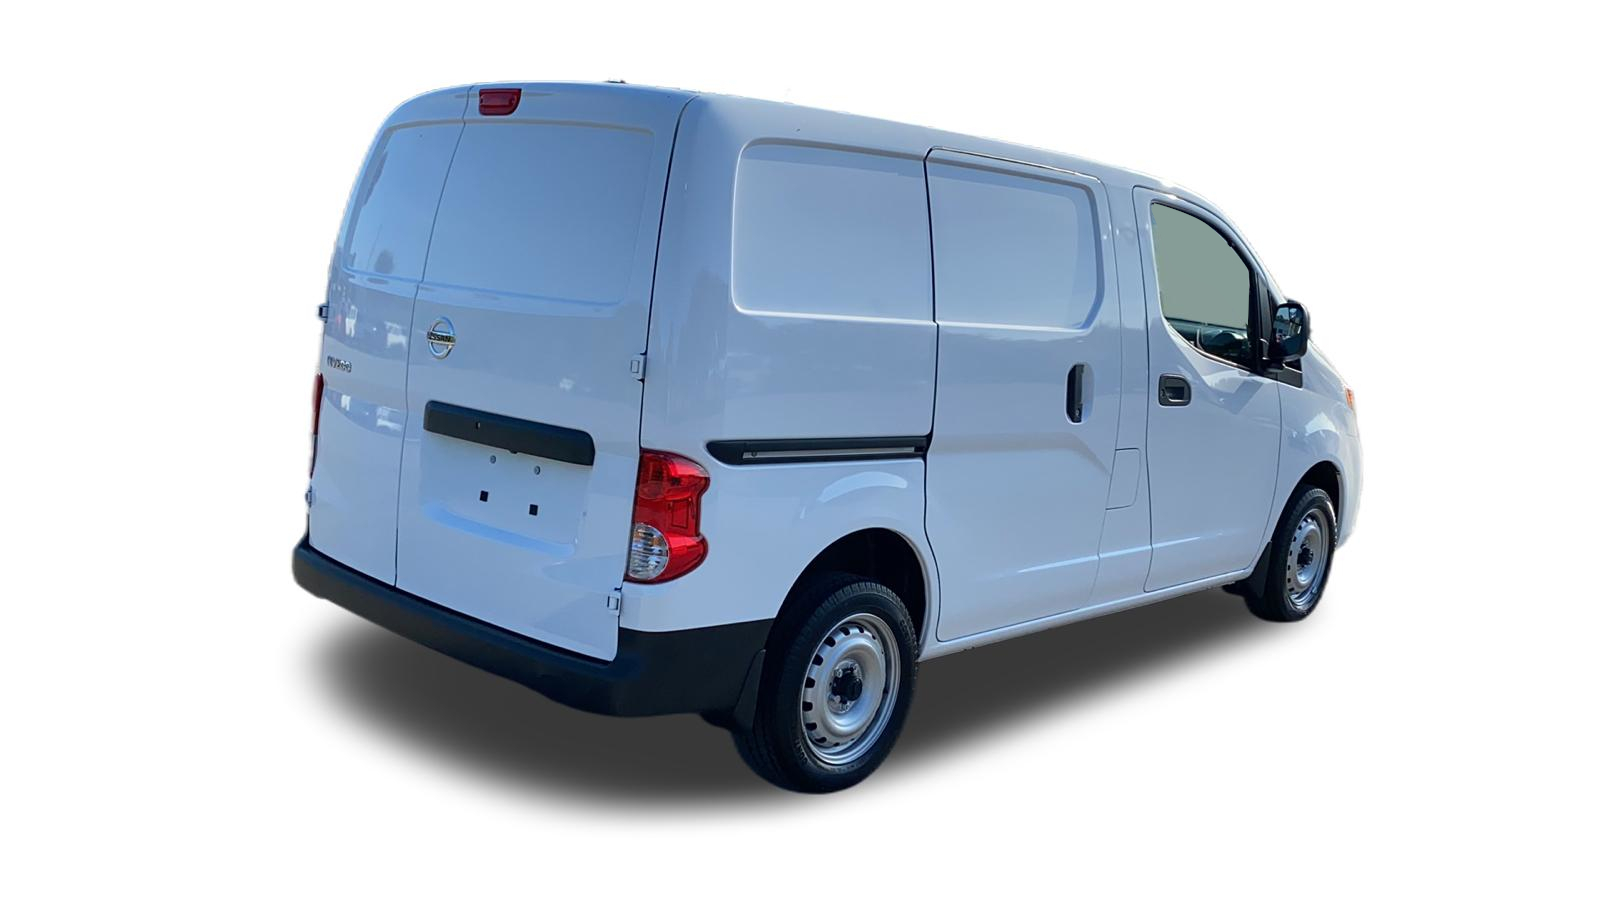 2021 Nissan NV200 Compact Cargo S 7